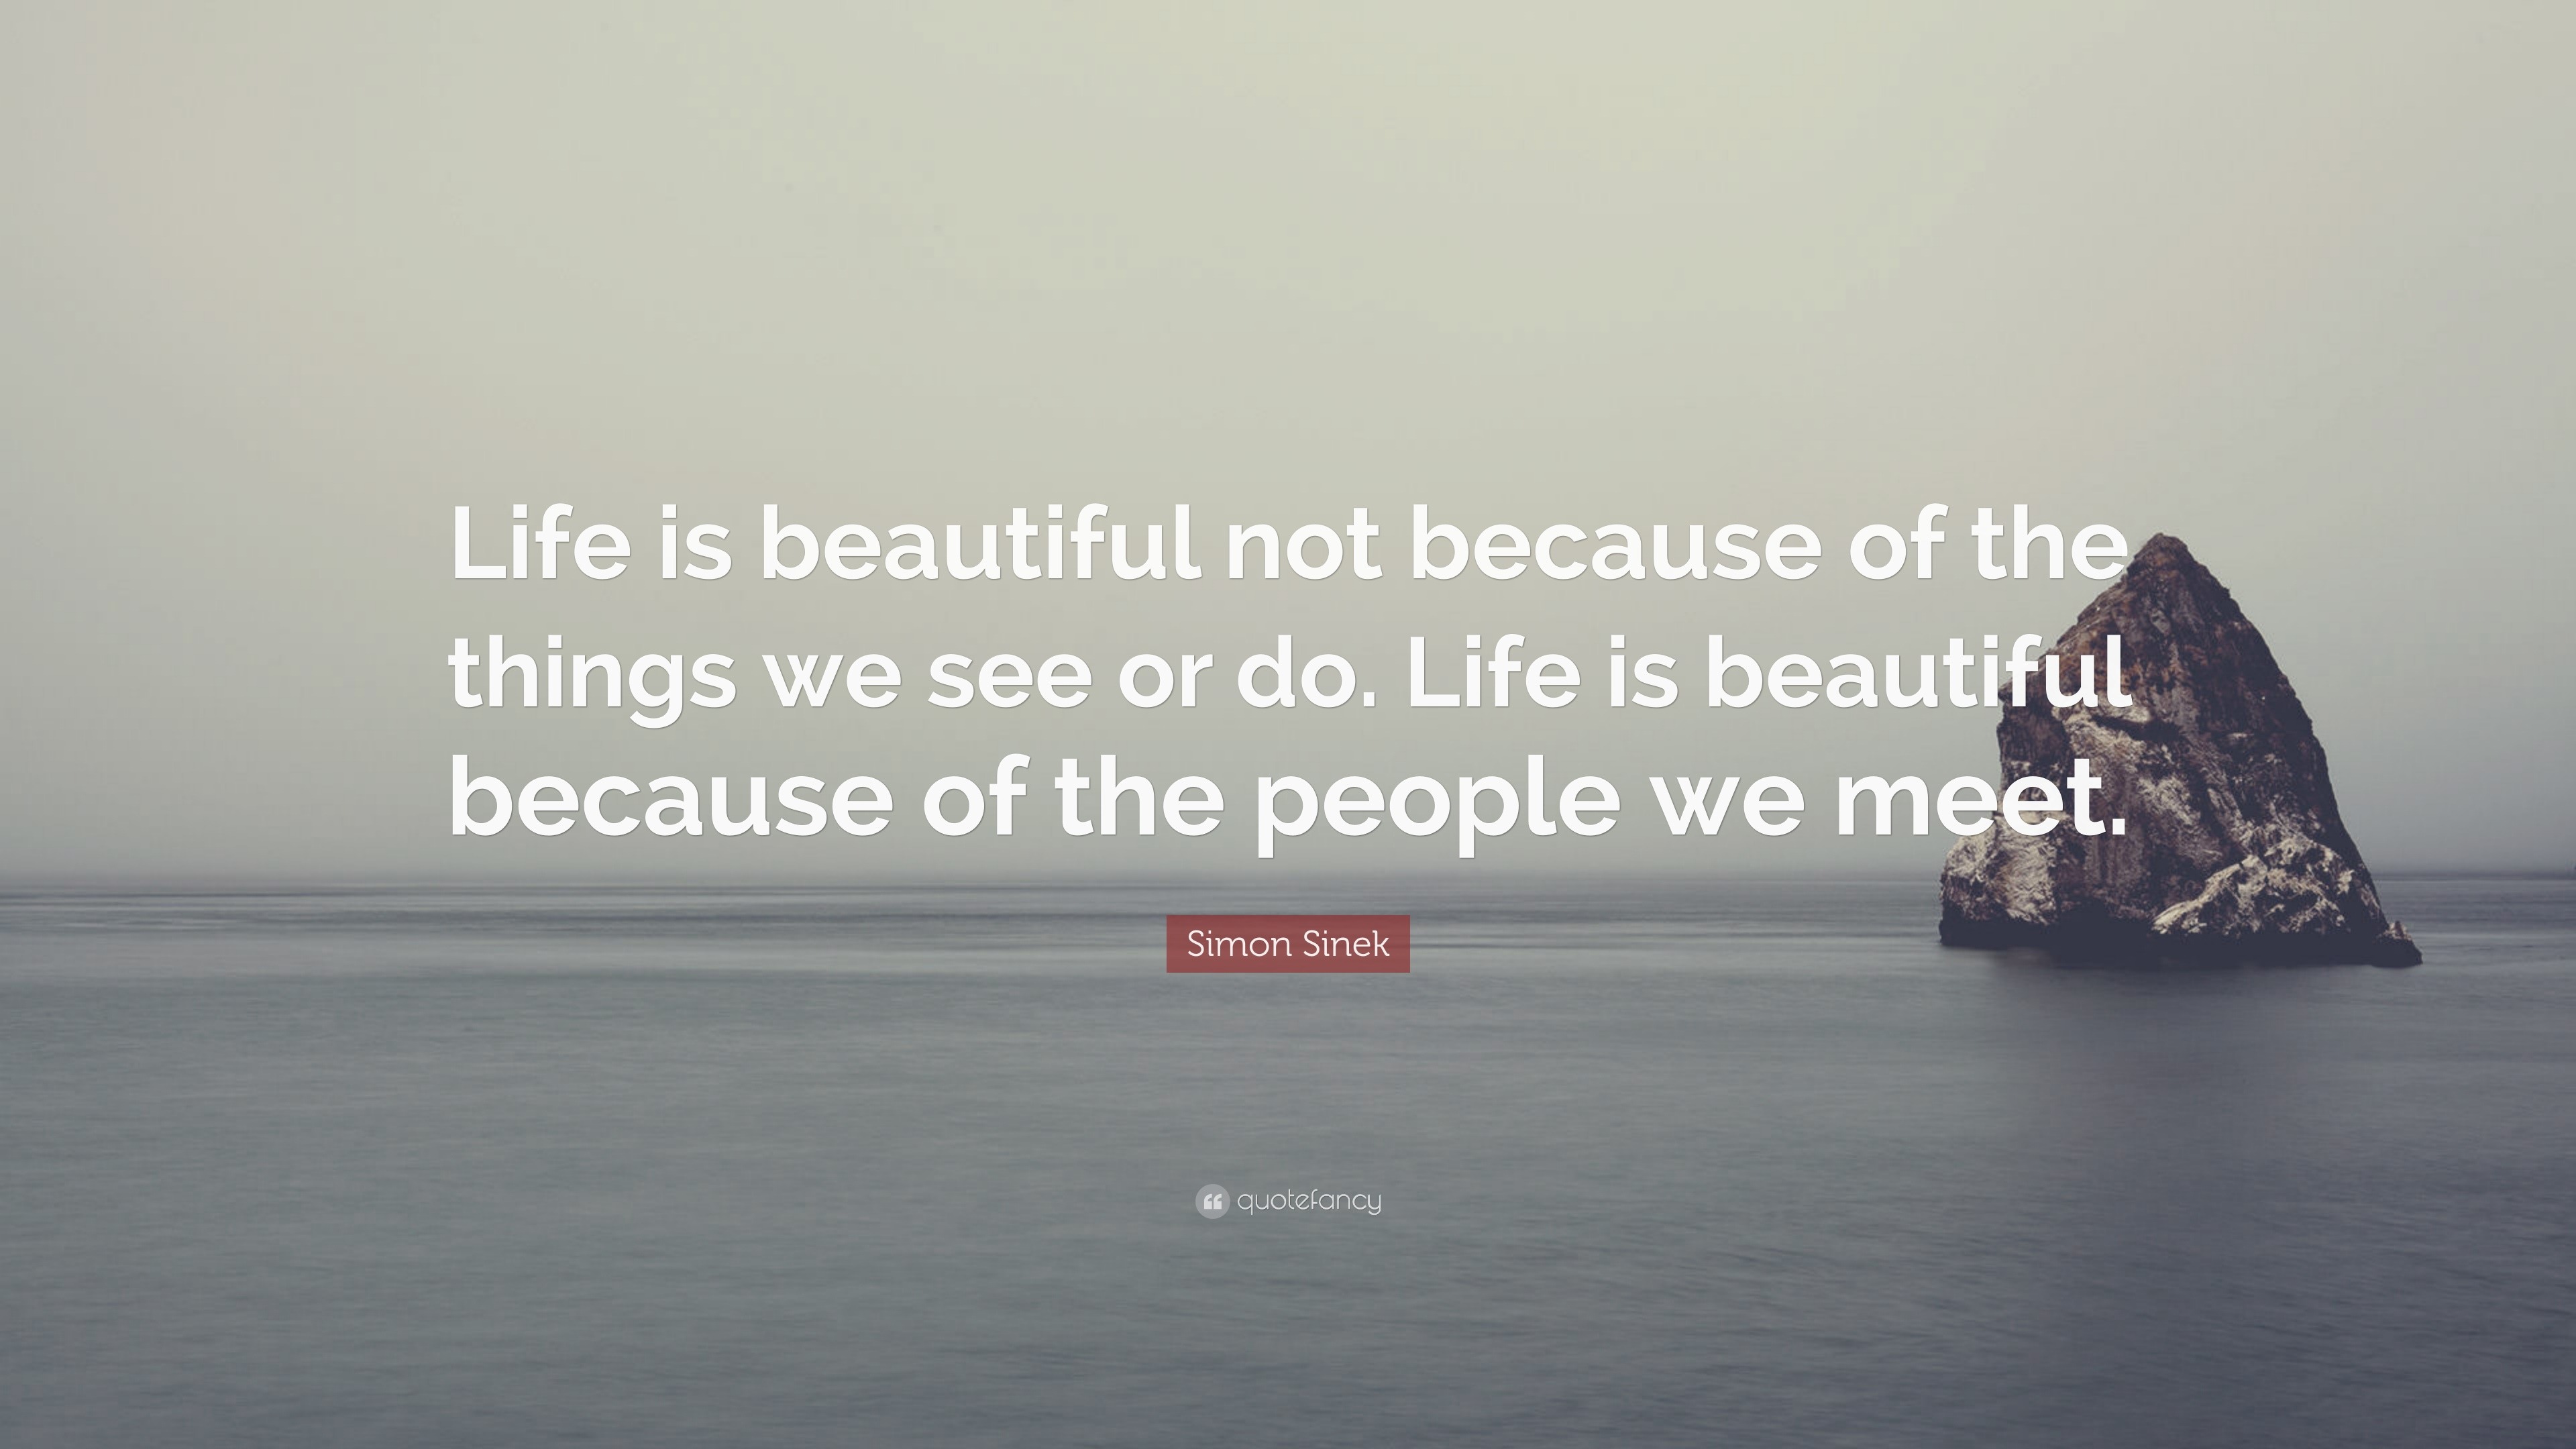 Simon Sinek Quote “Life is beautiful not because of the things we see or